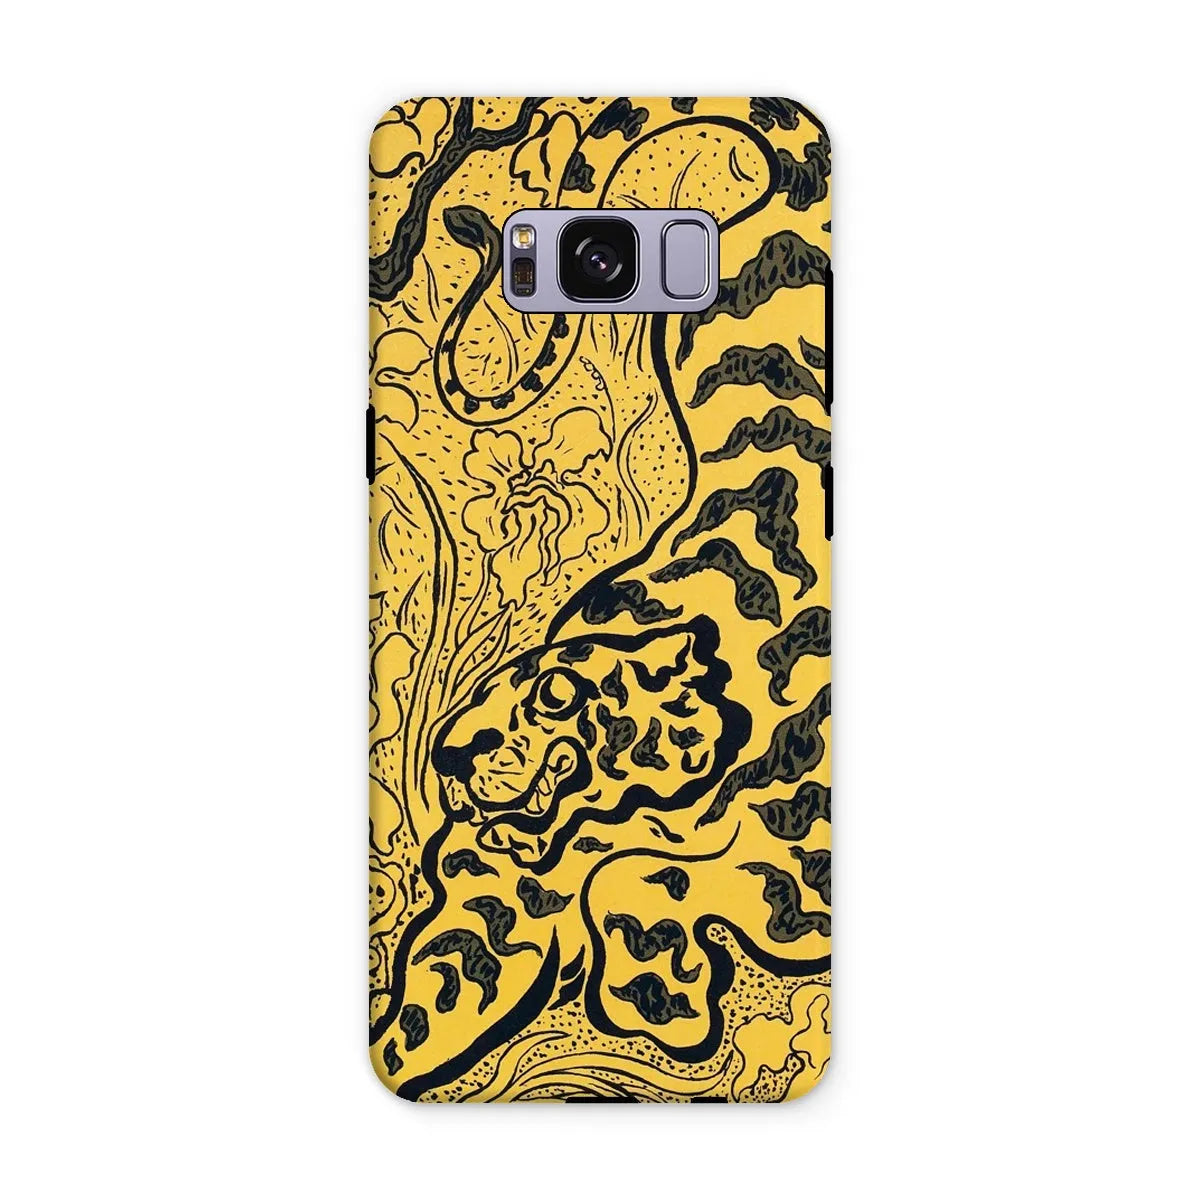 Tiger In The Jungle - Graphic Art Phone Case - Paul Ranson - Samsung Galaxy S8 Plus / Matte - Mobile Phone Cases